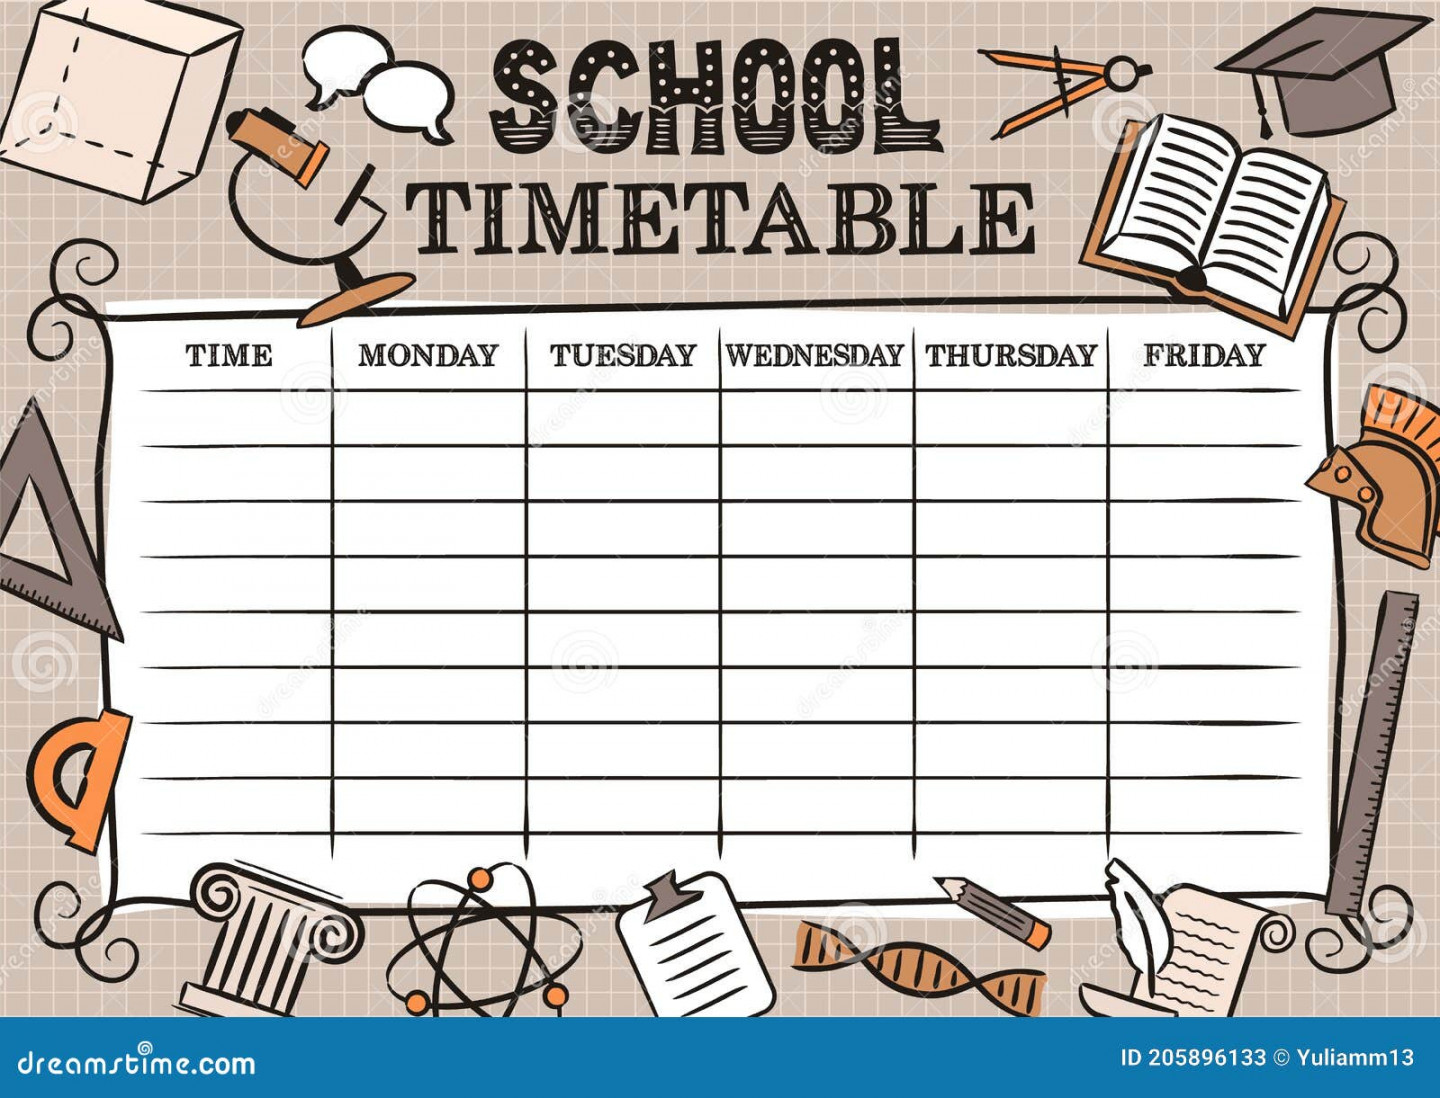 Vintage Template of a School Schedule for  Days of the Week for